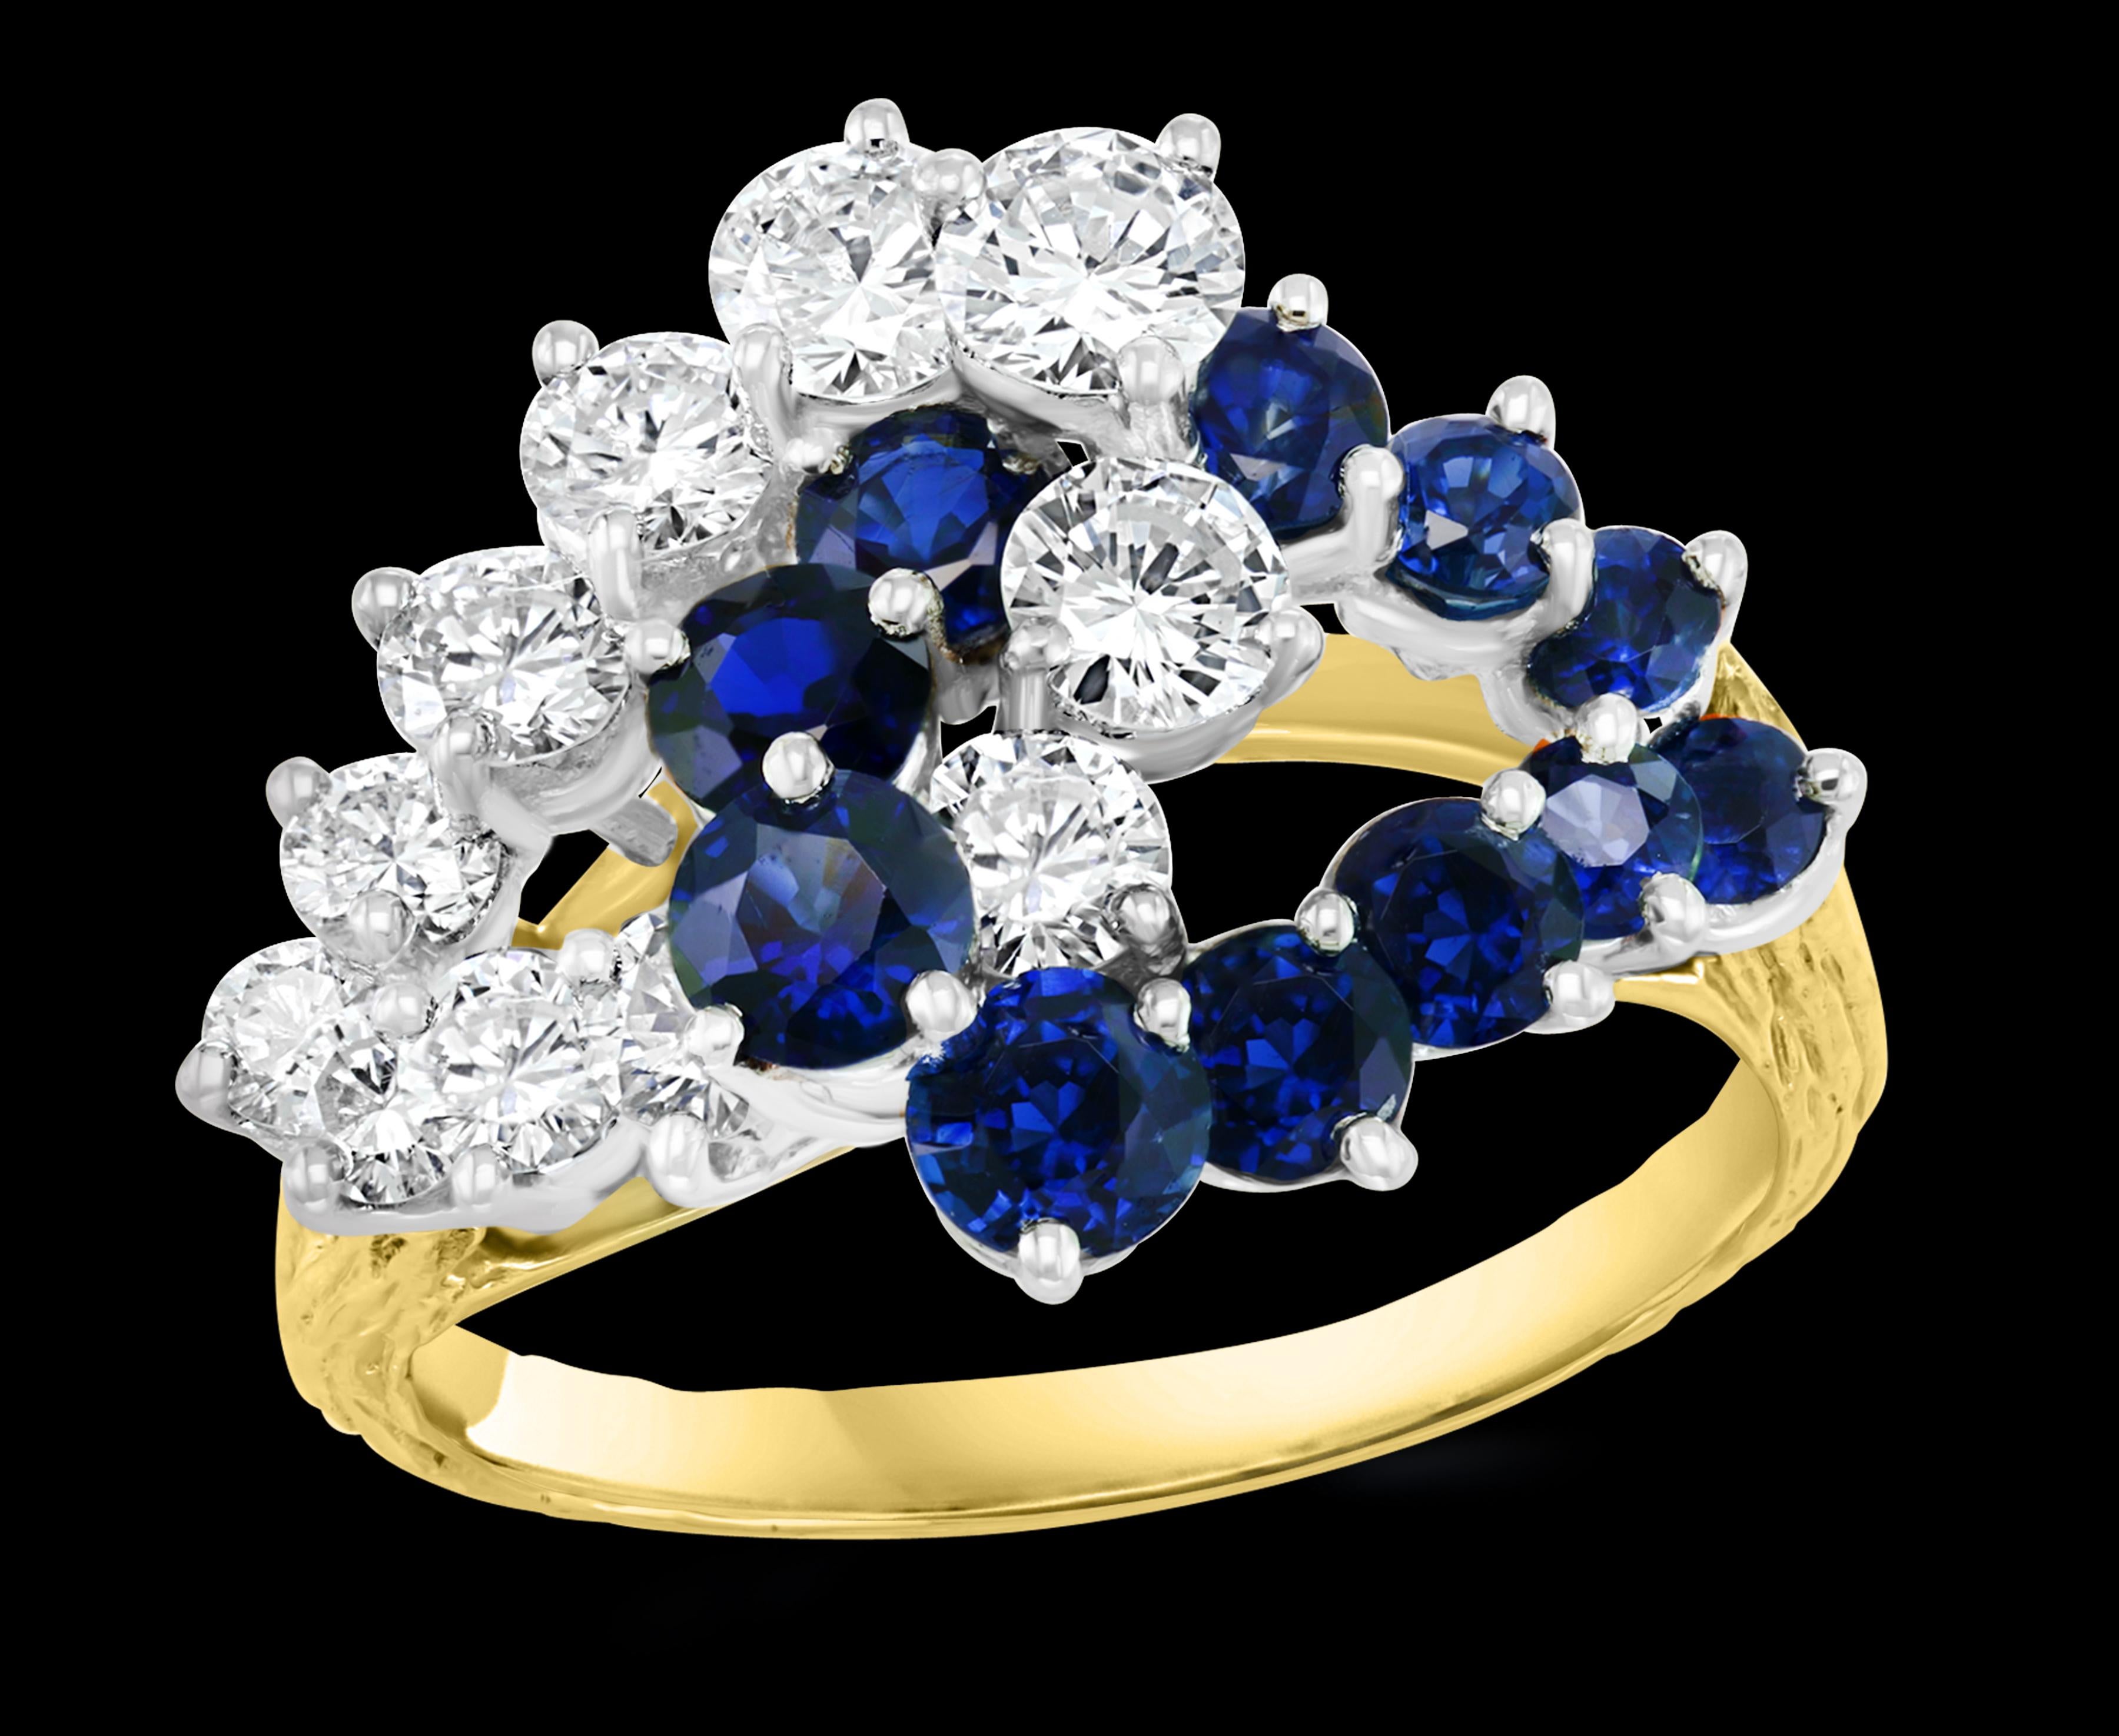 Approximately 1.5 Ct Blue Sapphire & 1.4 Ct Diamond Cocktail Ring  18 Karat Yellow Gold Estate
1.5 Carat of blue Sapphire. This is an estate piece 
Round Brilliant cut diamond.    Total Diamond Weight of  brilliant  Round cut diamonds approximately